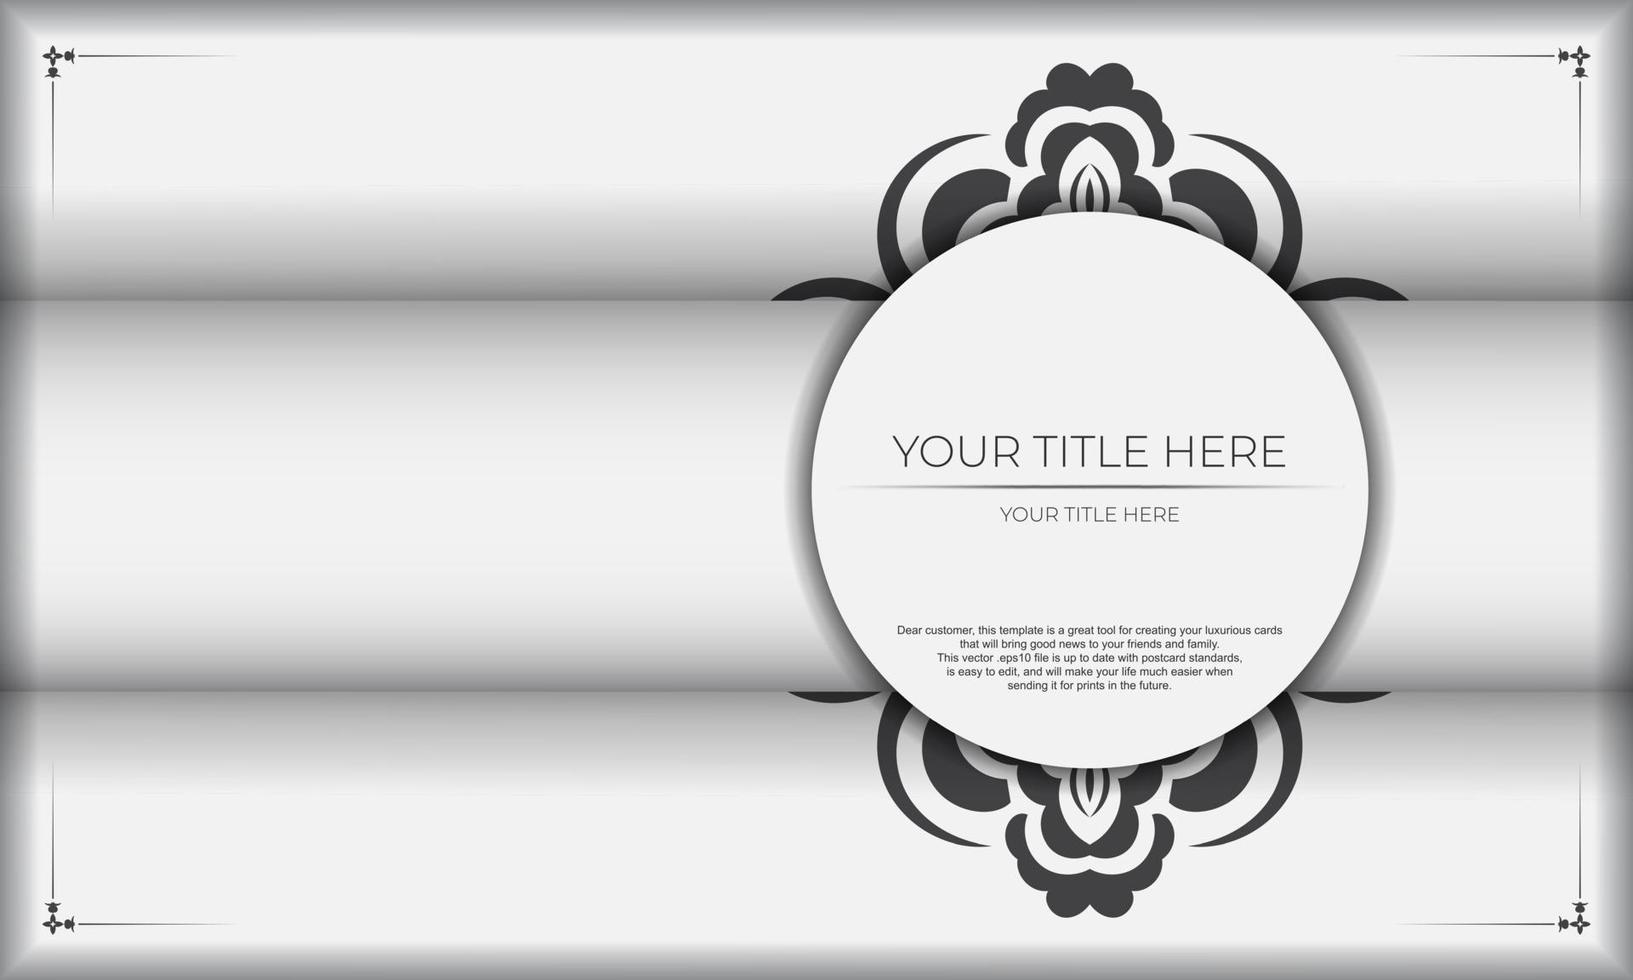 White banner of gorgeous vector patterns with mandala ornaments and place for your text. Invitation card design with mandala patterns.